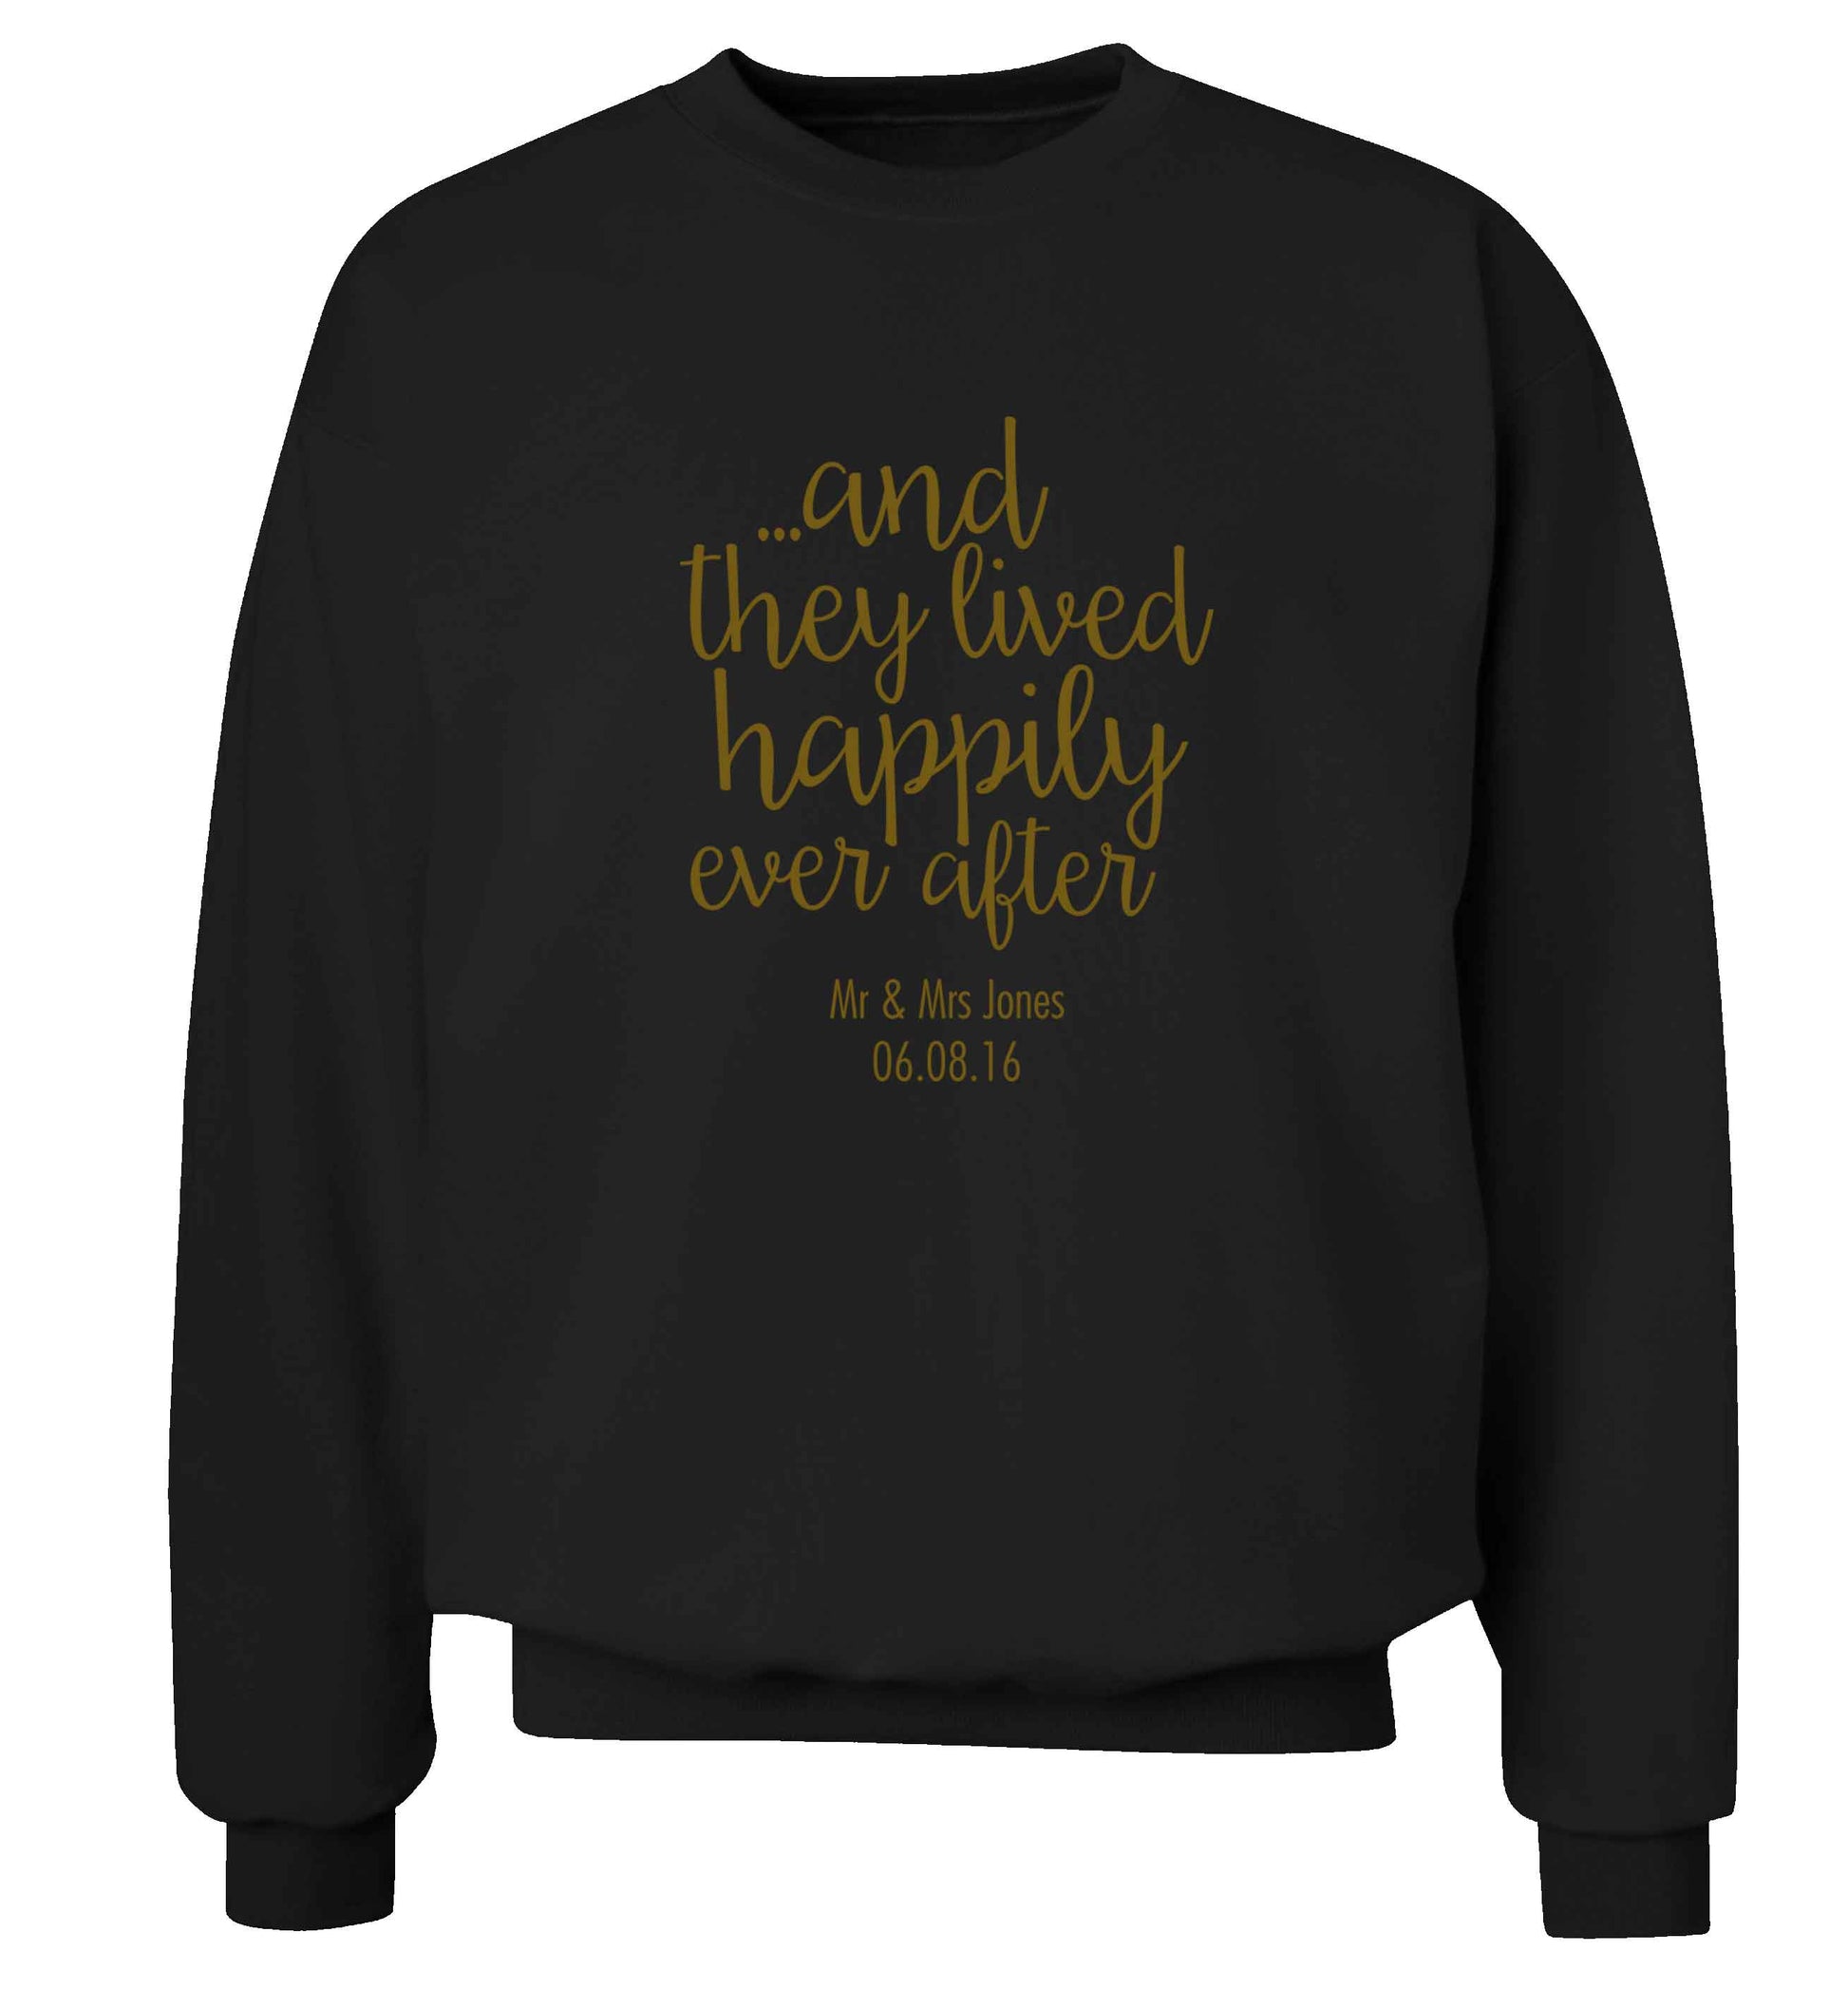 ...and they lived happily ever after - personalised date and names adult's unisex black sweater 2XL